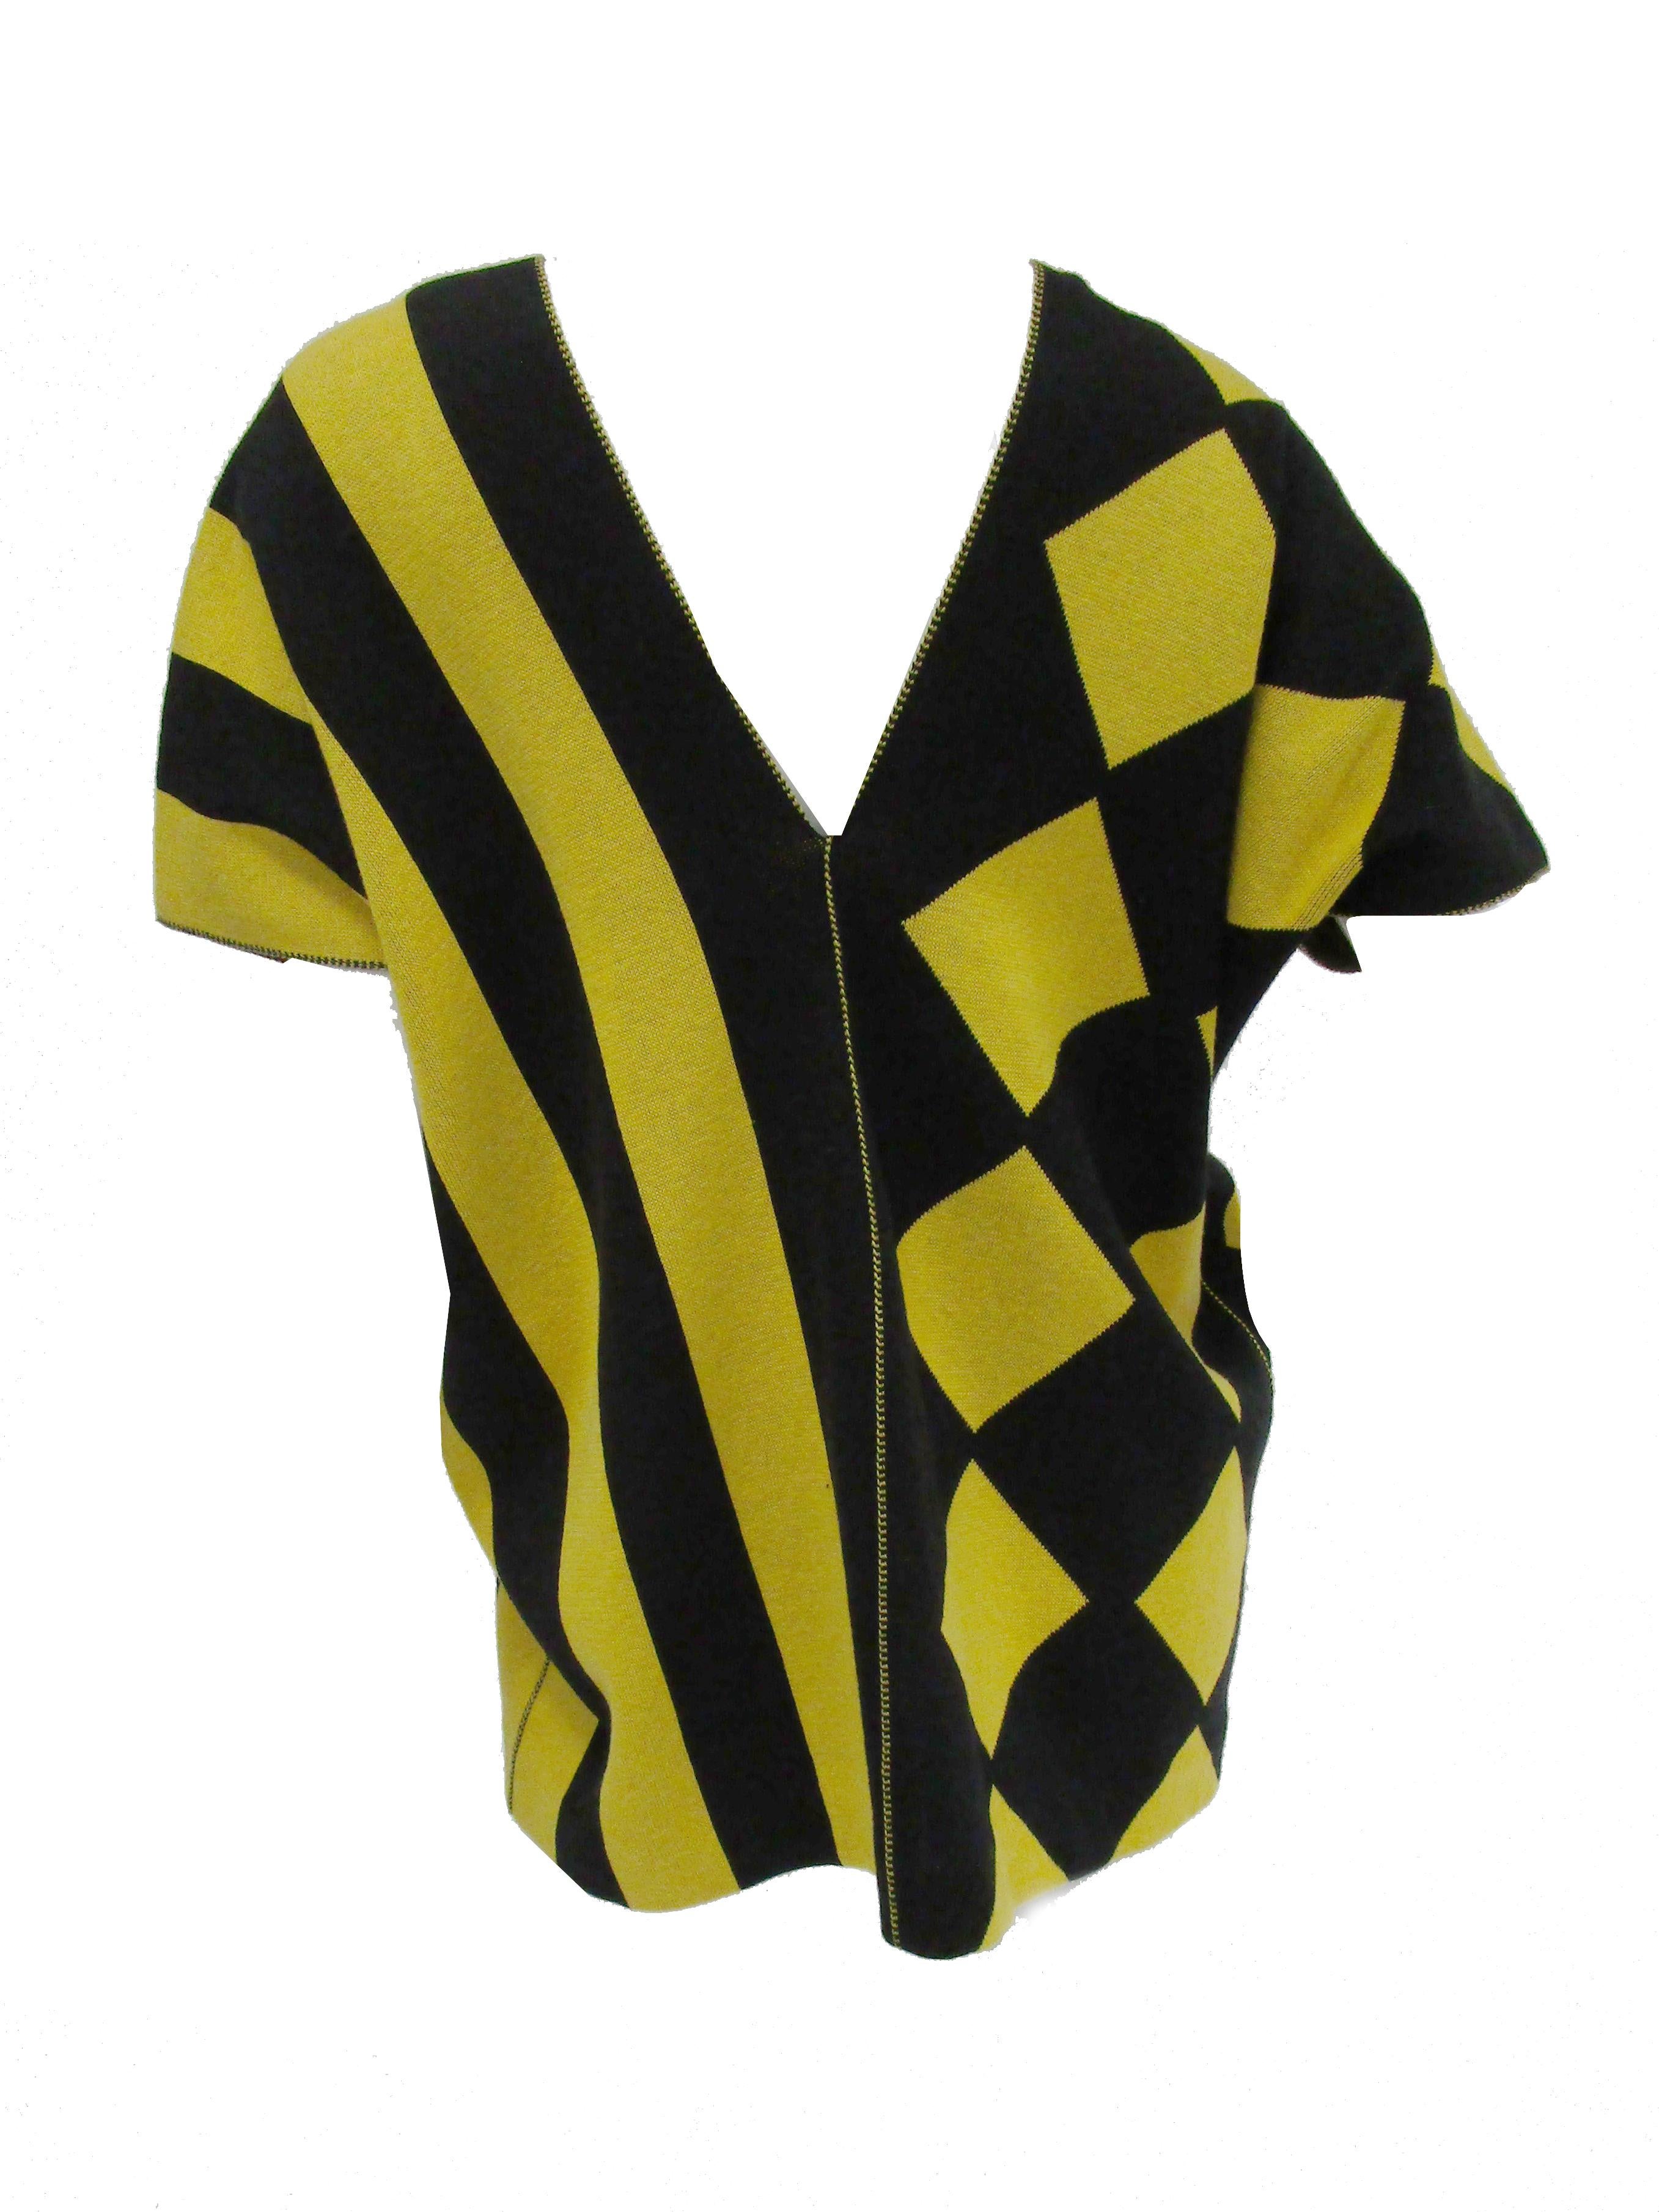 Women's or Men's 1980s Issey Miyake Yellow and Black Diamond and Stripe Cotton Knit Top For Sale